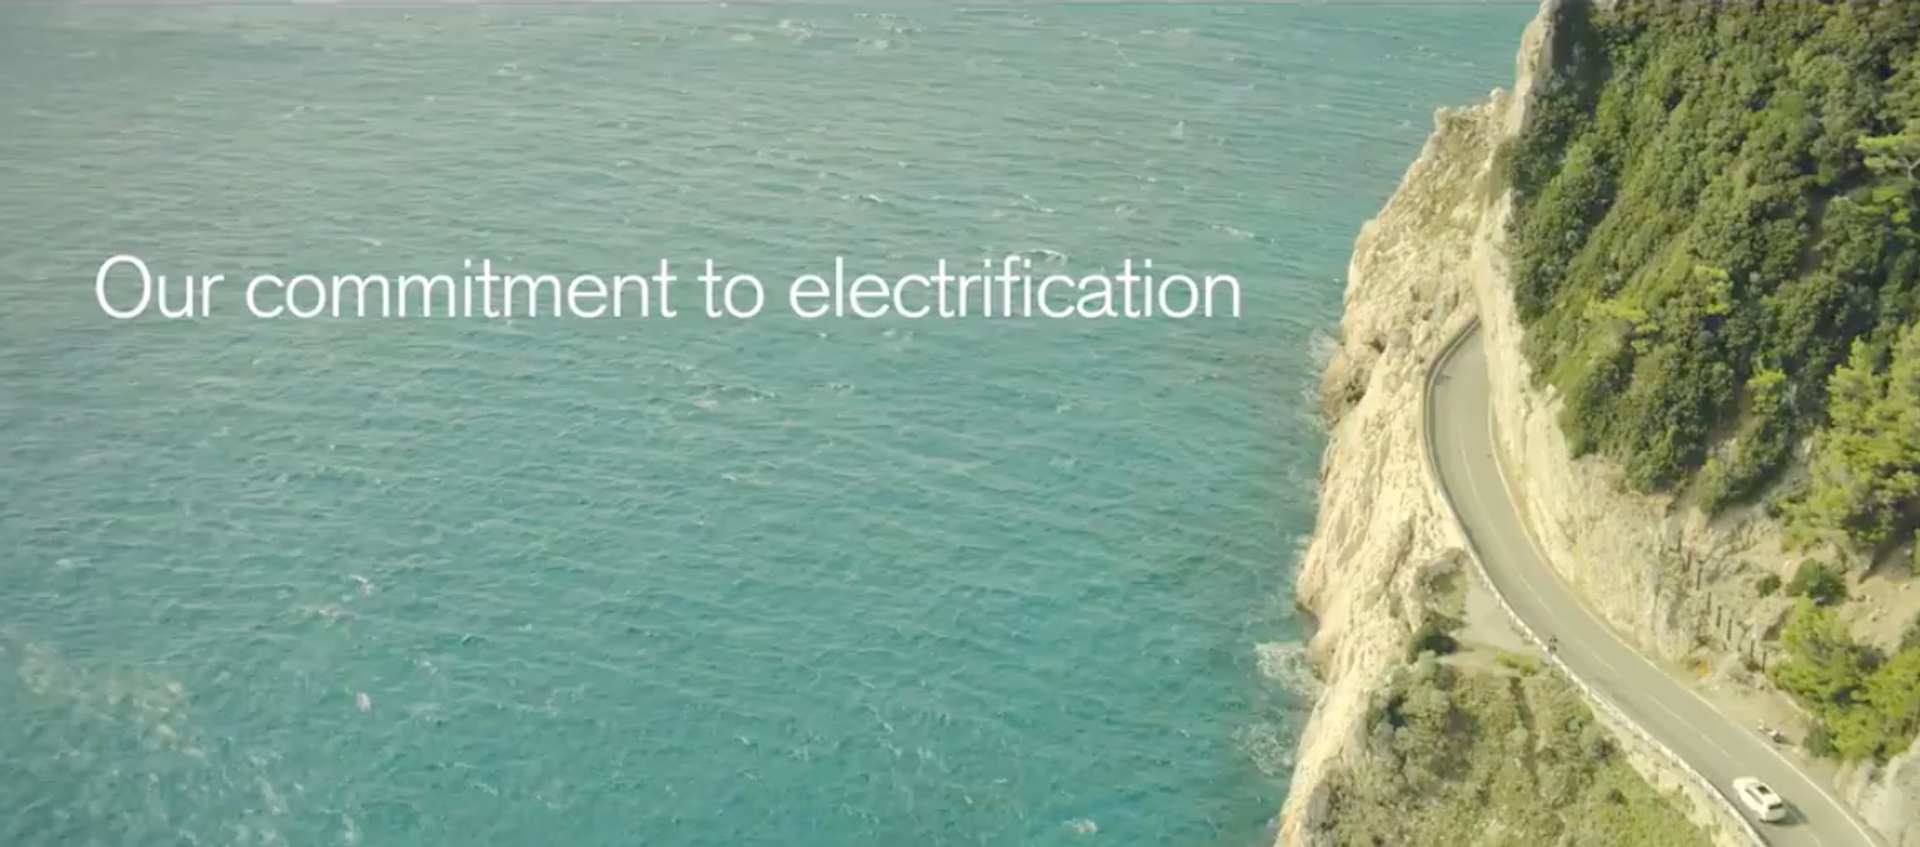 Volvo commitment to electricity